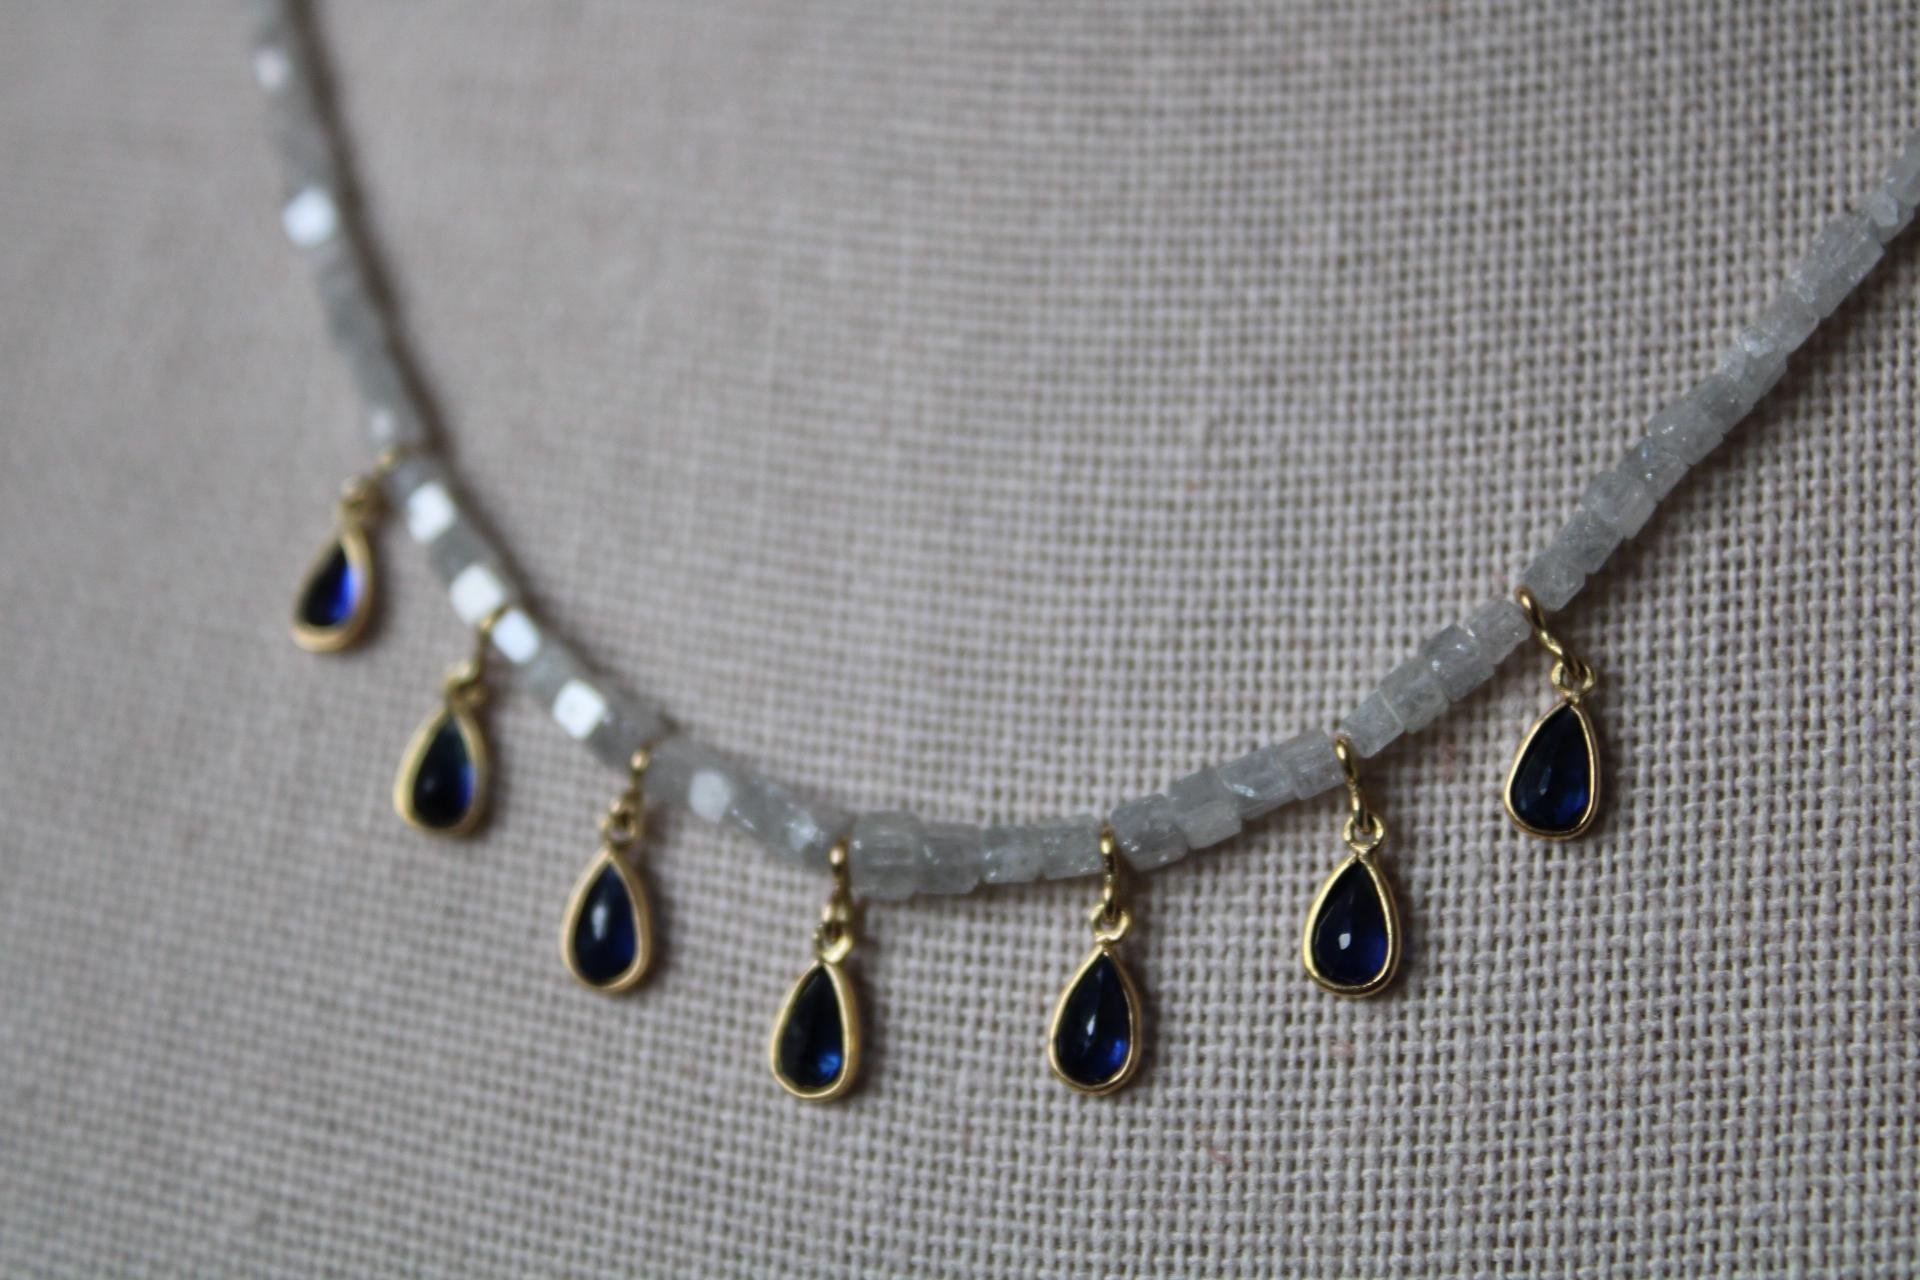 This gorgeous diamond bead necklace is comprised of 15.99 carats. It has seven deep blue sapphire pear pendants set in 18K gold bezel. The diamond beads are cut in tube shape which allow for maximum sparkle and shine. The necklace measures 18